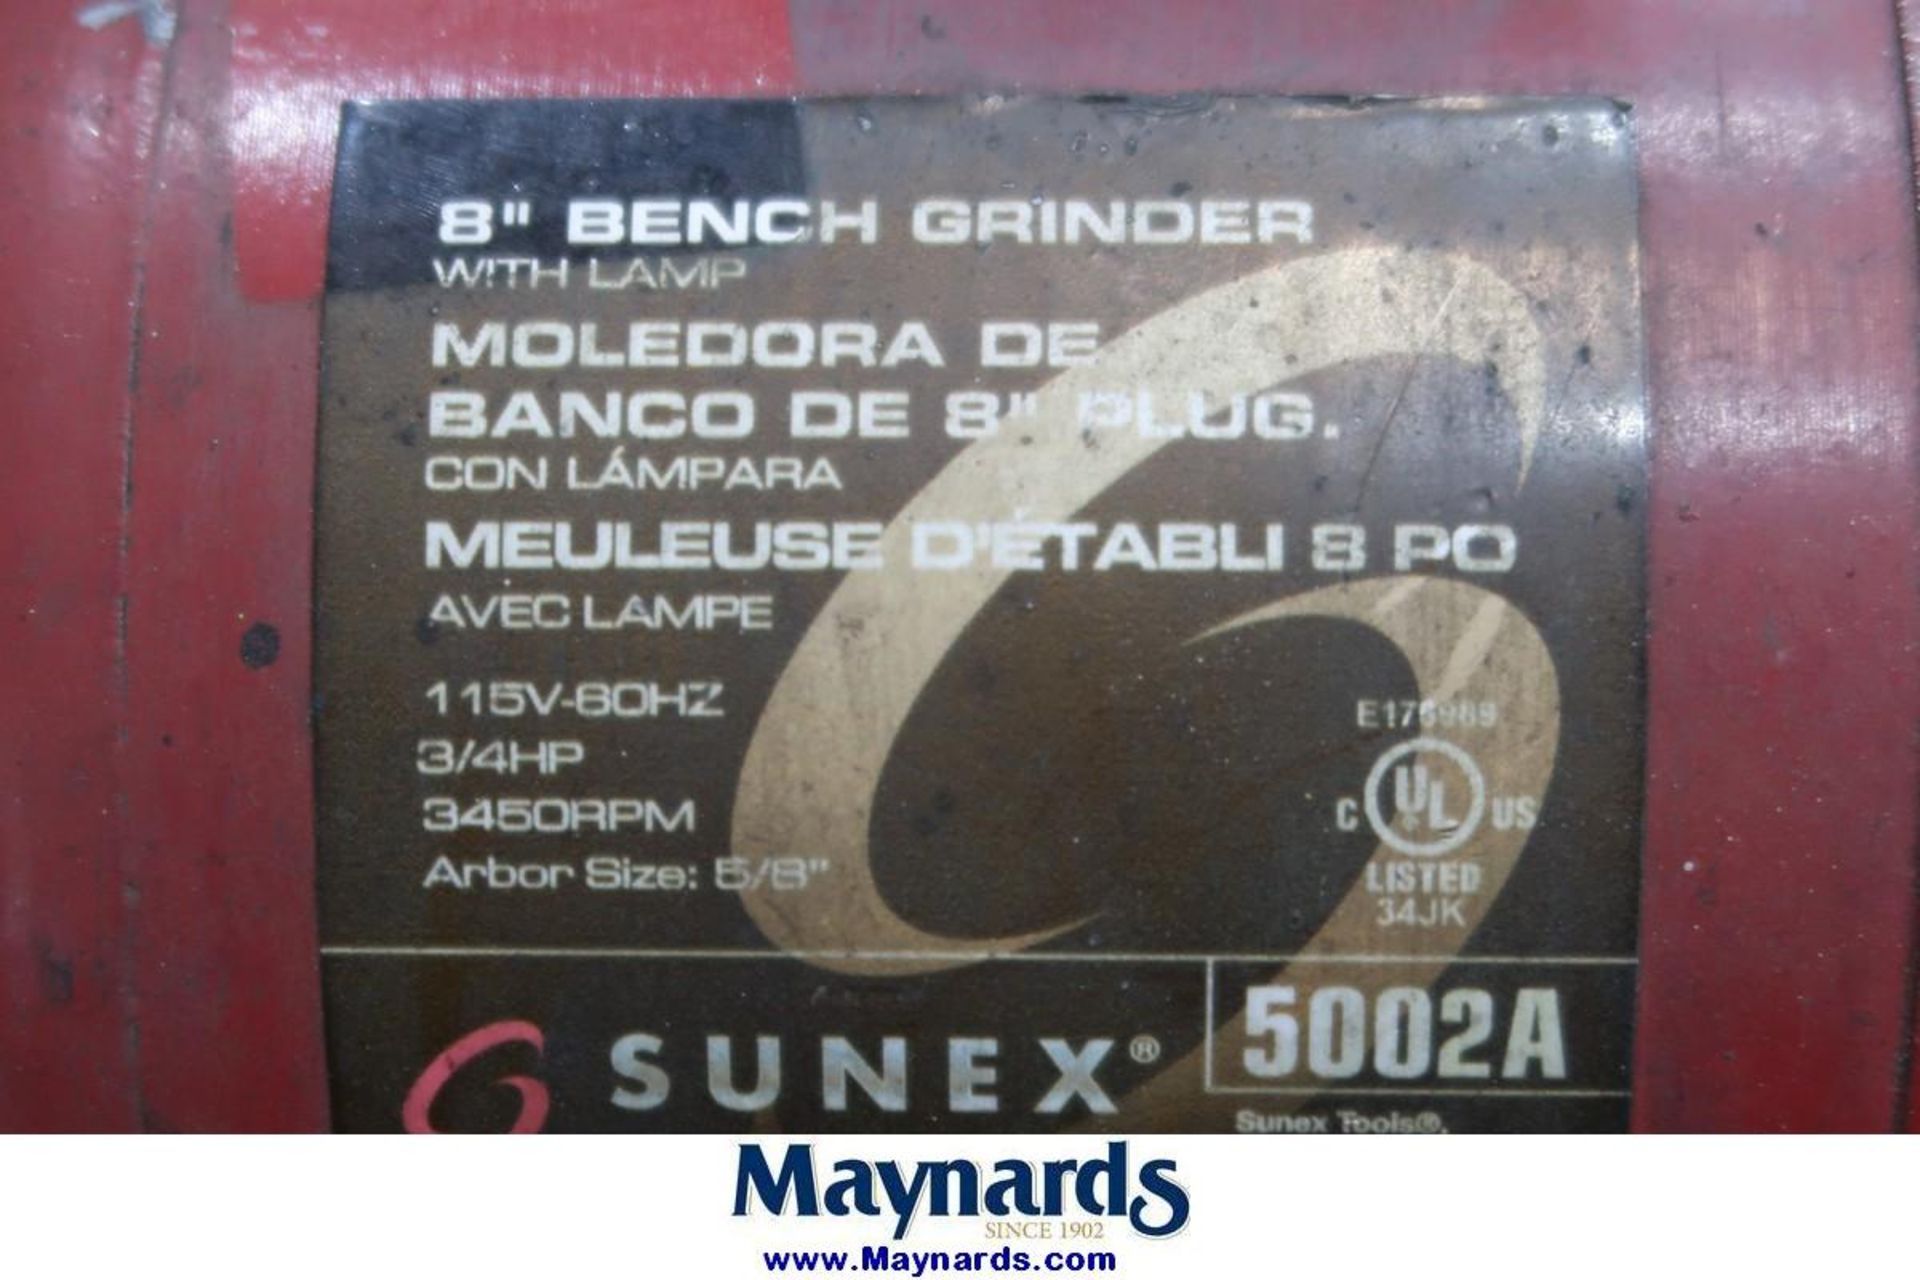 Sunex Tools 5002A 8" Bench Grinder - Image 2 of 2